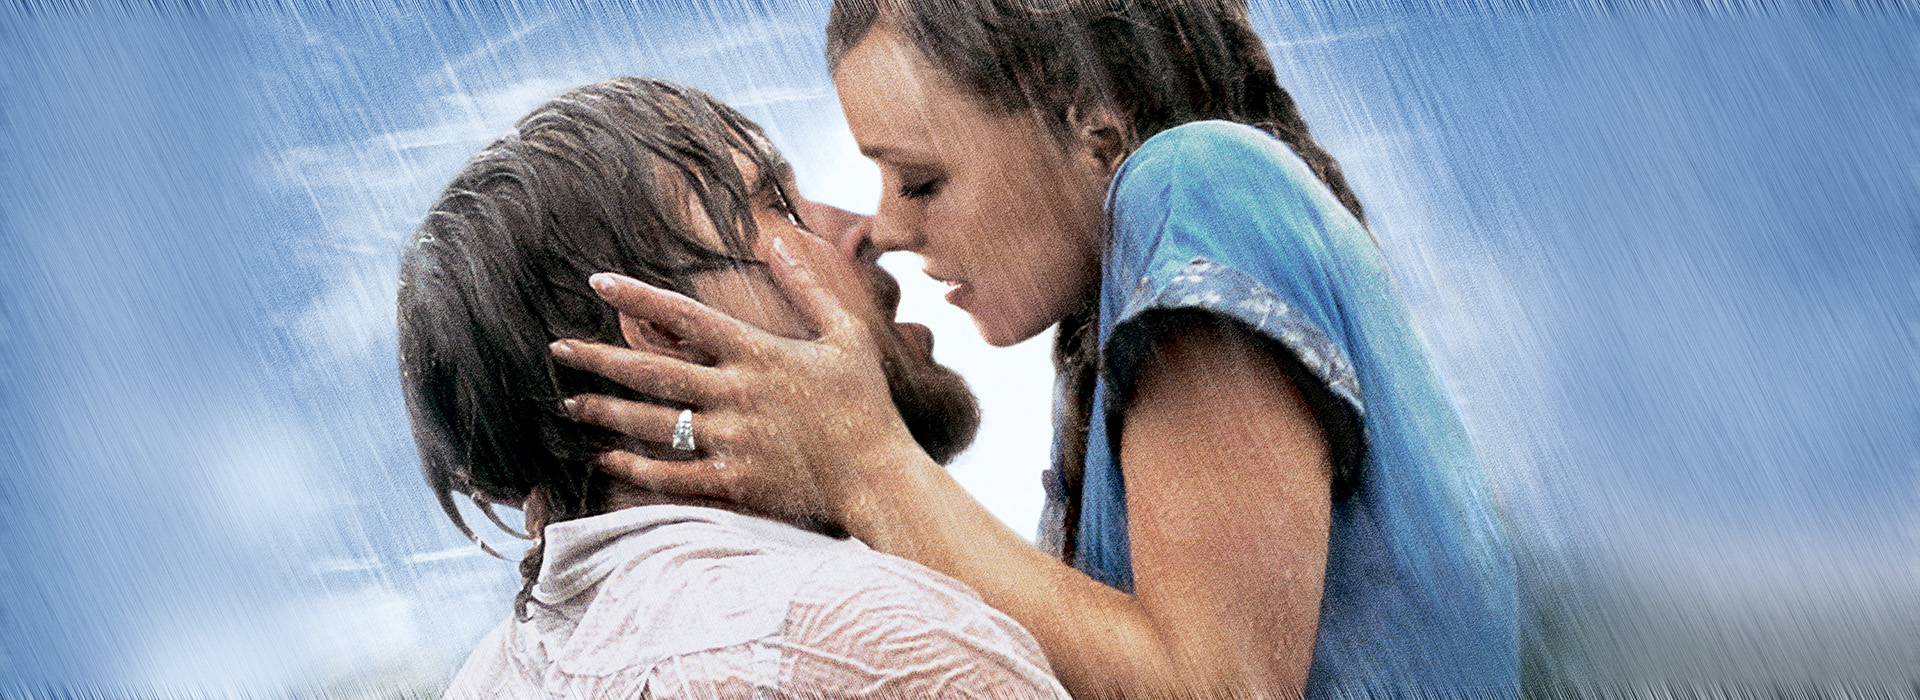 Movie poster The Notebook